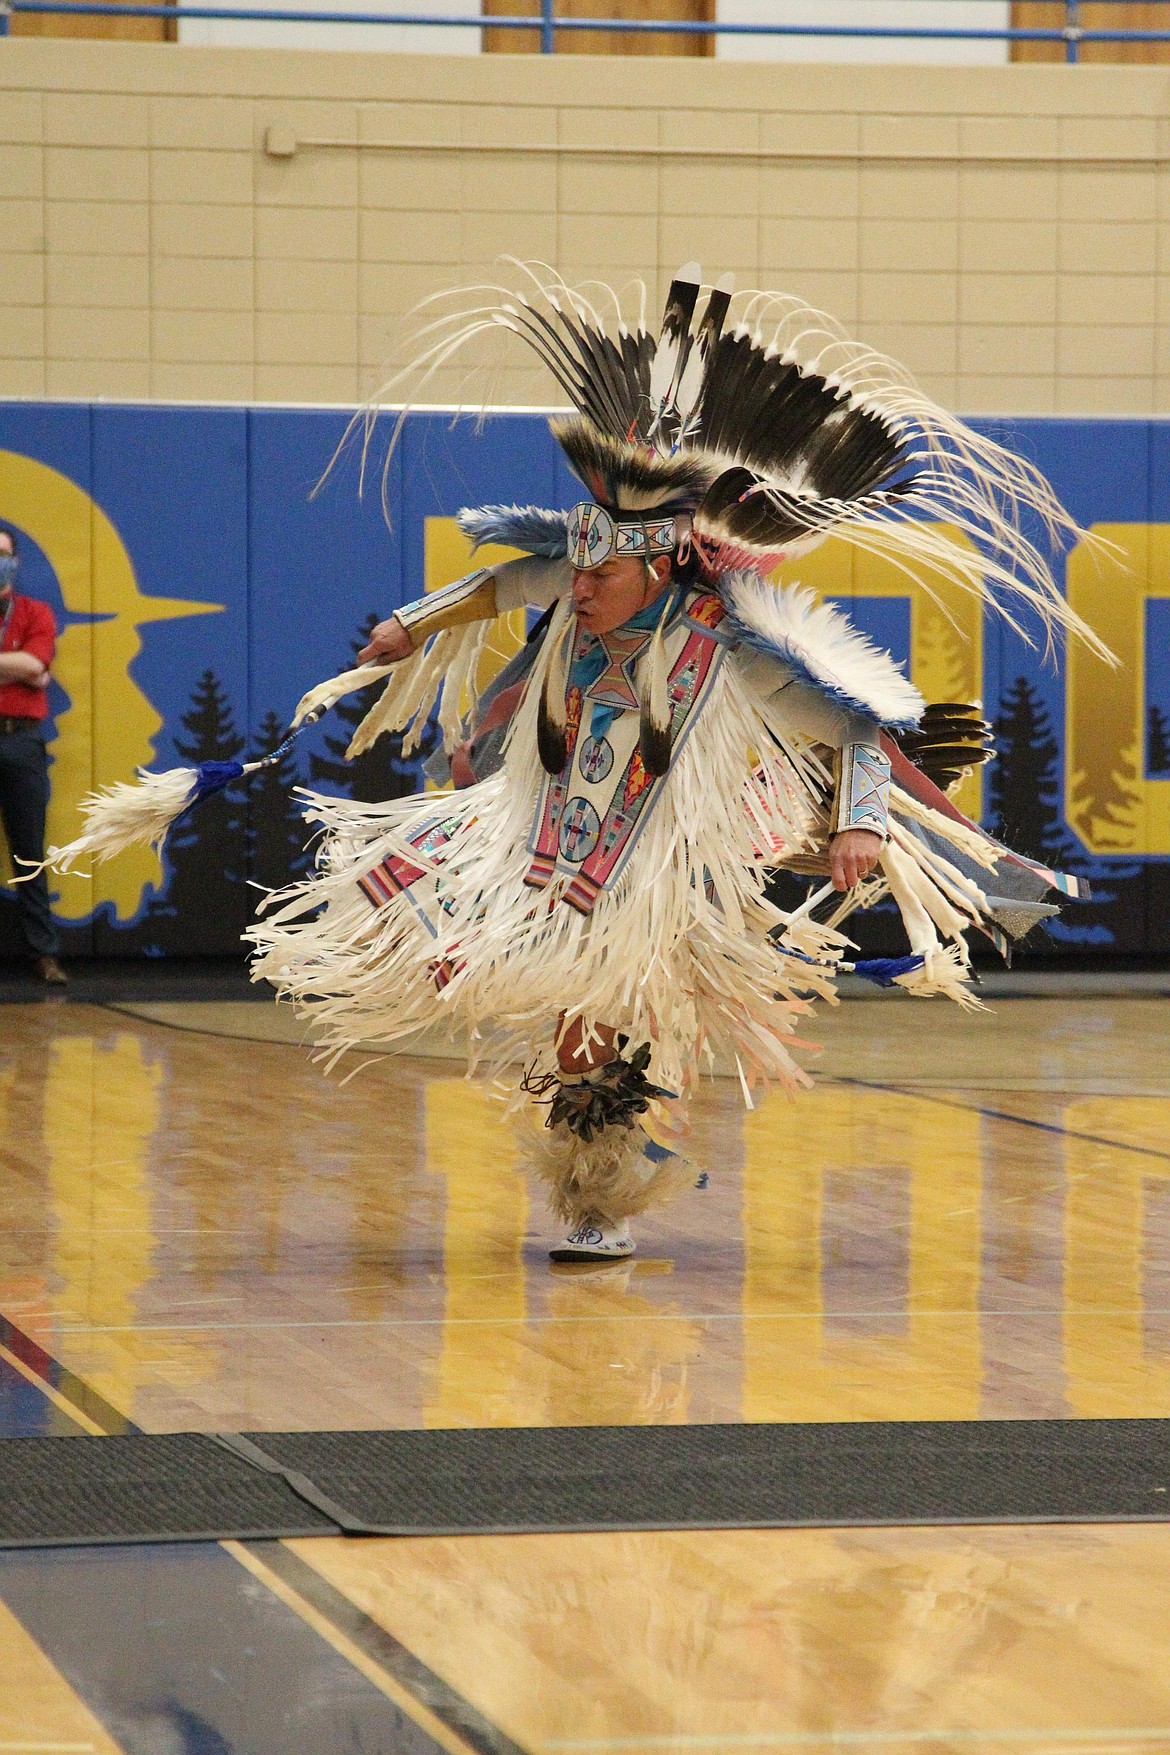 Supaman preforms a style of dance known as "fancy dance" during a Nov. 9 preformance at Libby Middle High School. (Will Langhorne/The Western News)